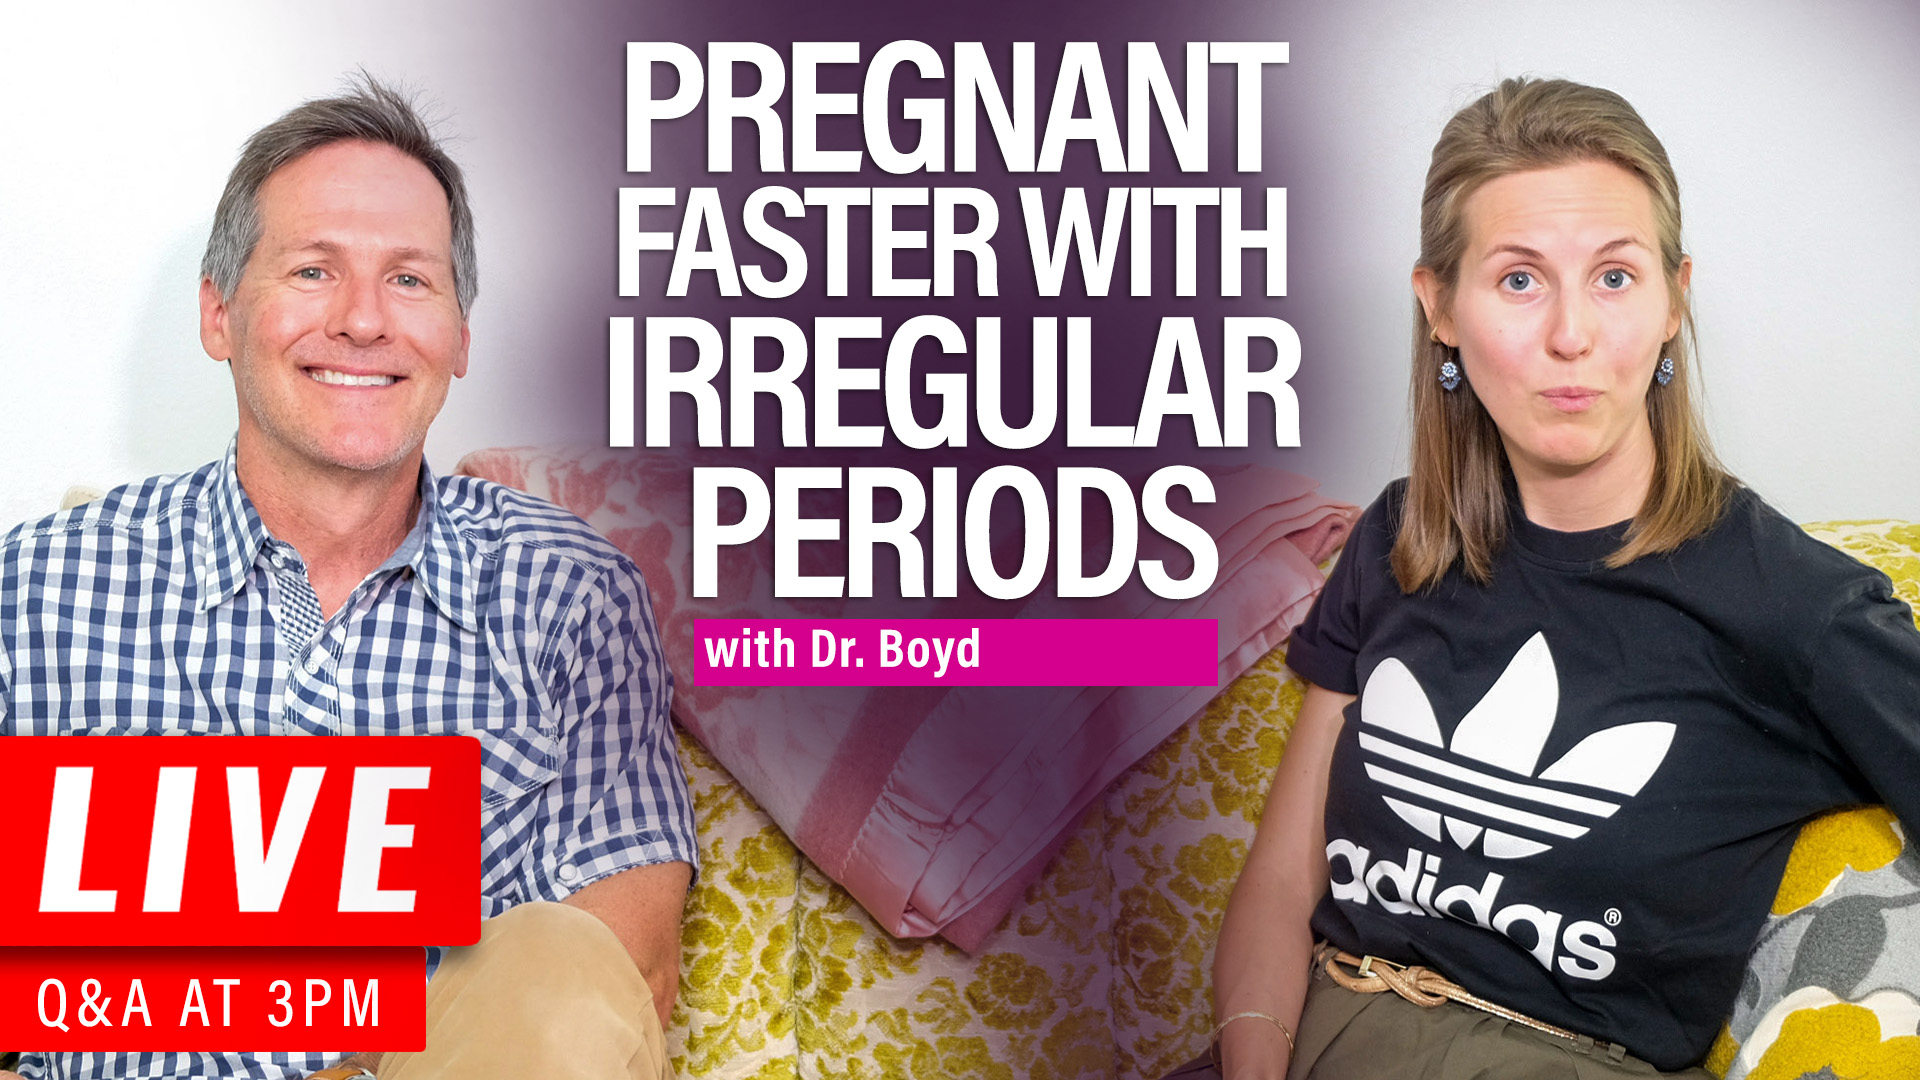 How to Get Pregnant Faster with Irregular Periods